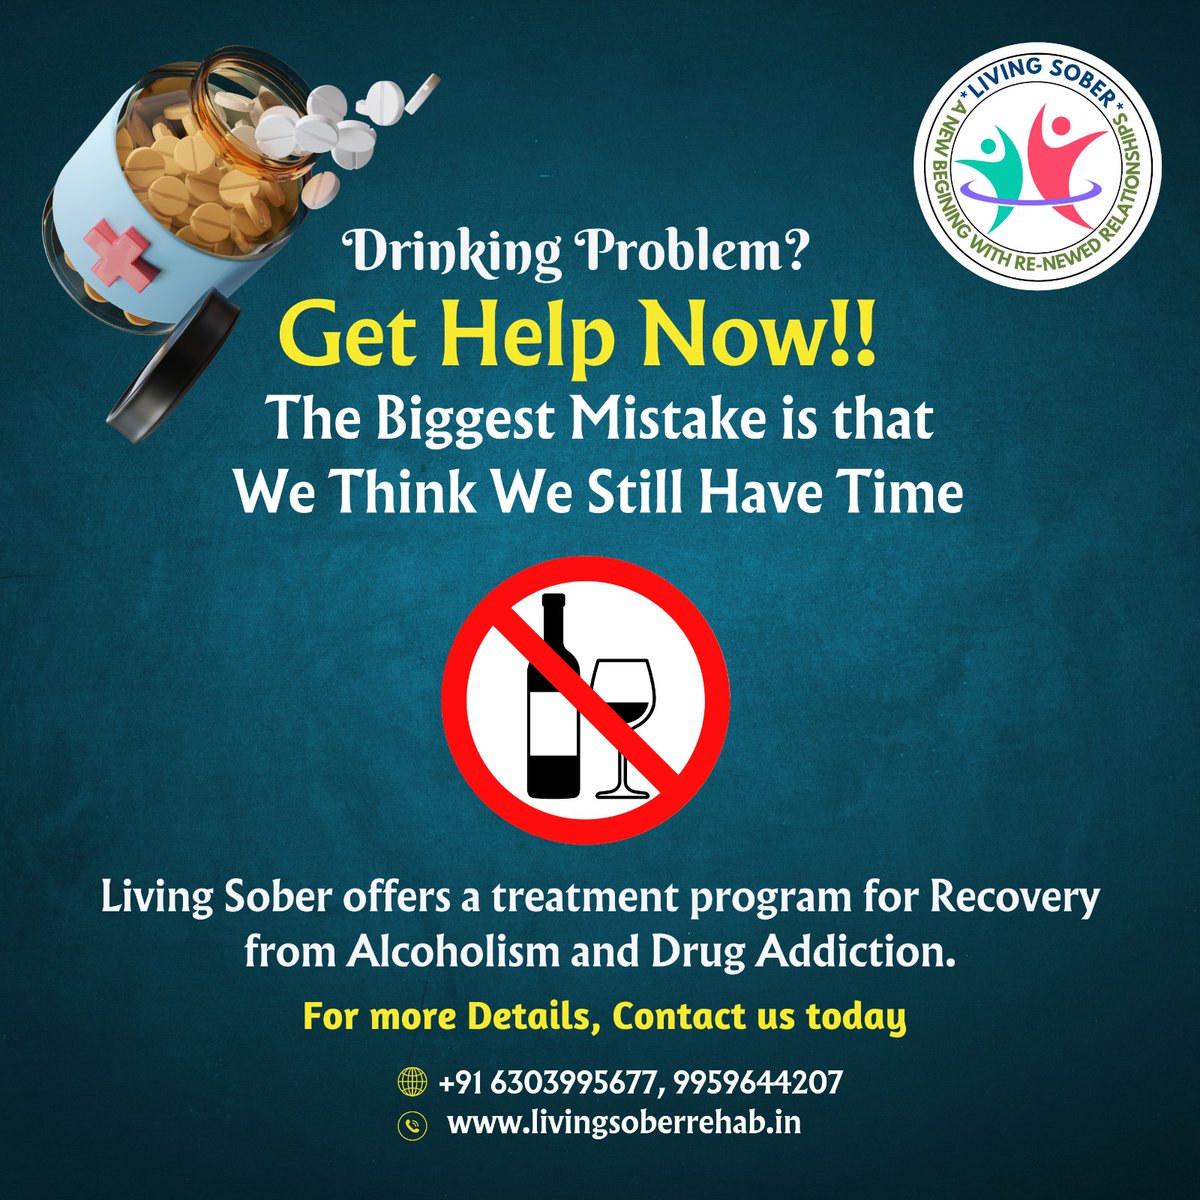 Struggling with Drinking problem ? The biggest mistake is thinking there's still time. Don't wait – get help now! Living Sober is here to guide you through a compassionate and effective treatment program for recovery from addiction.
#LivingSober #OvercomingAddiction #AlcoholRehab